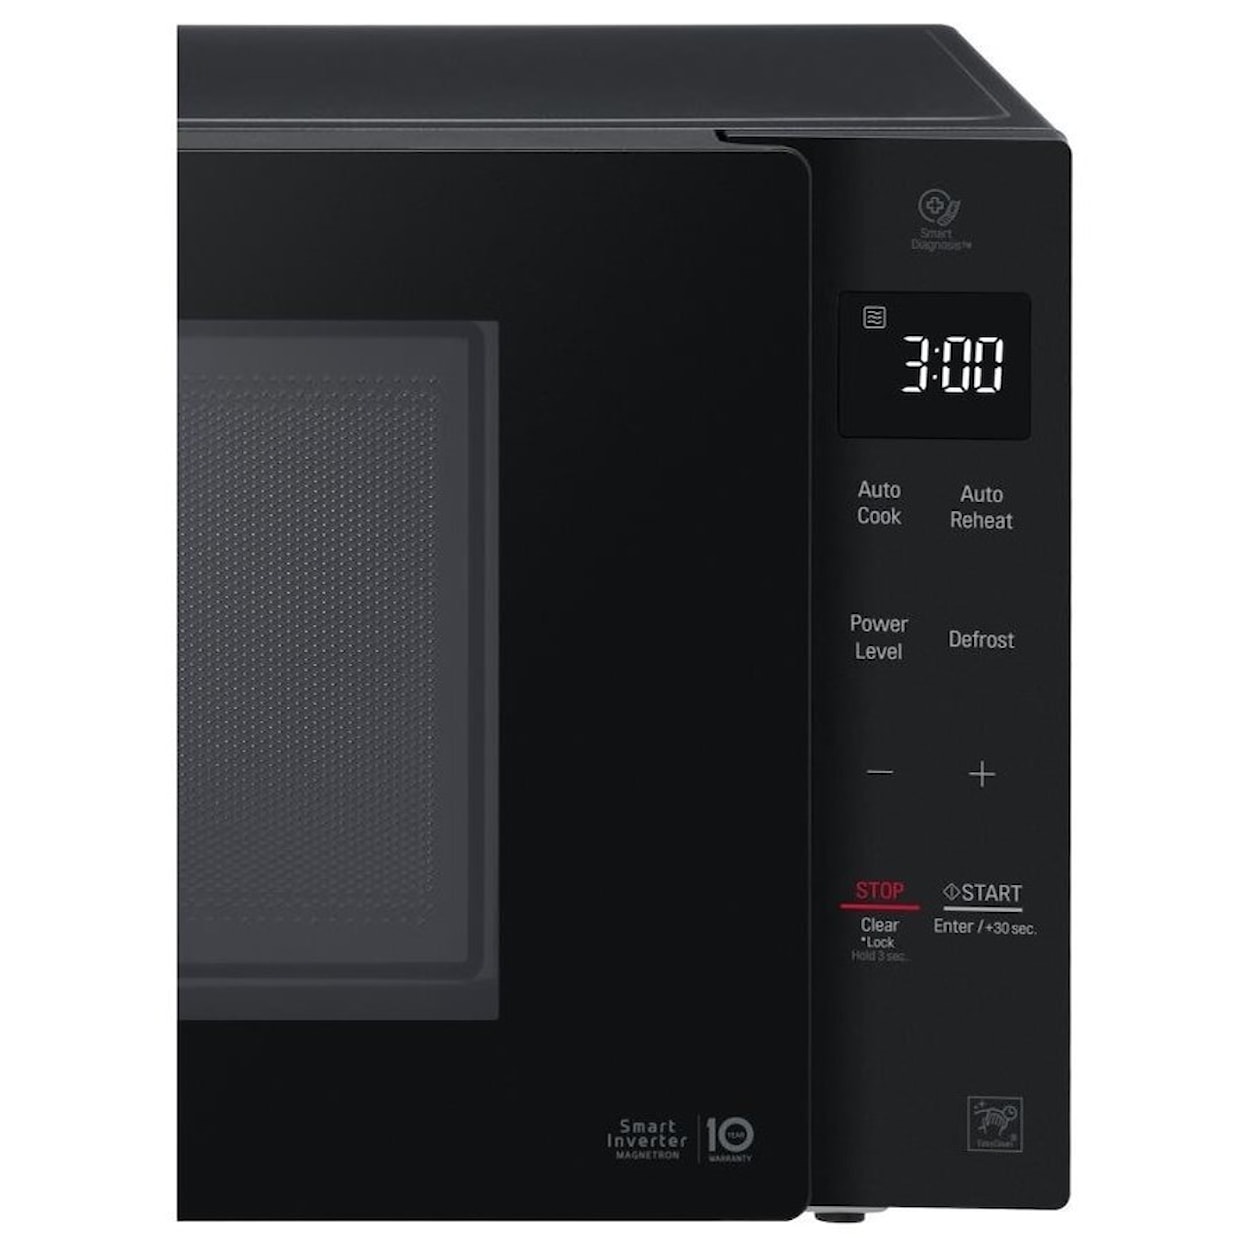 LG Appliances Microwaves 1.2 cu. ft. NeoChef™ Countertop Microwave